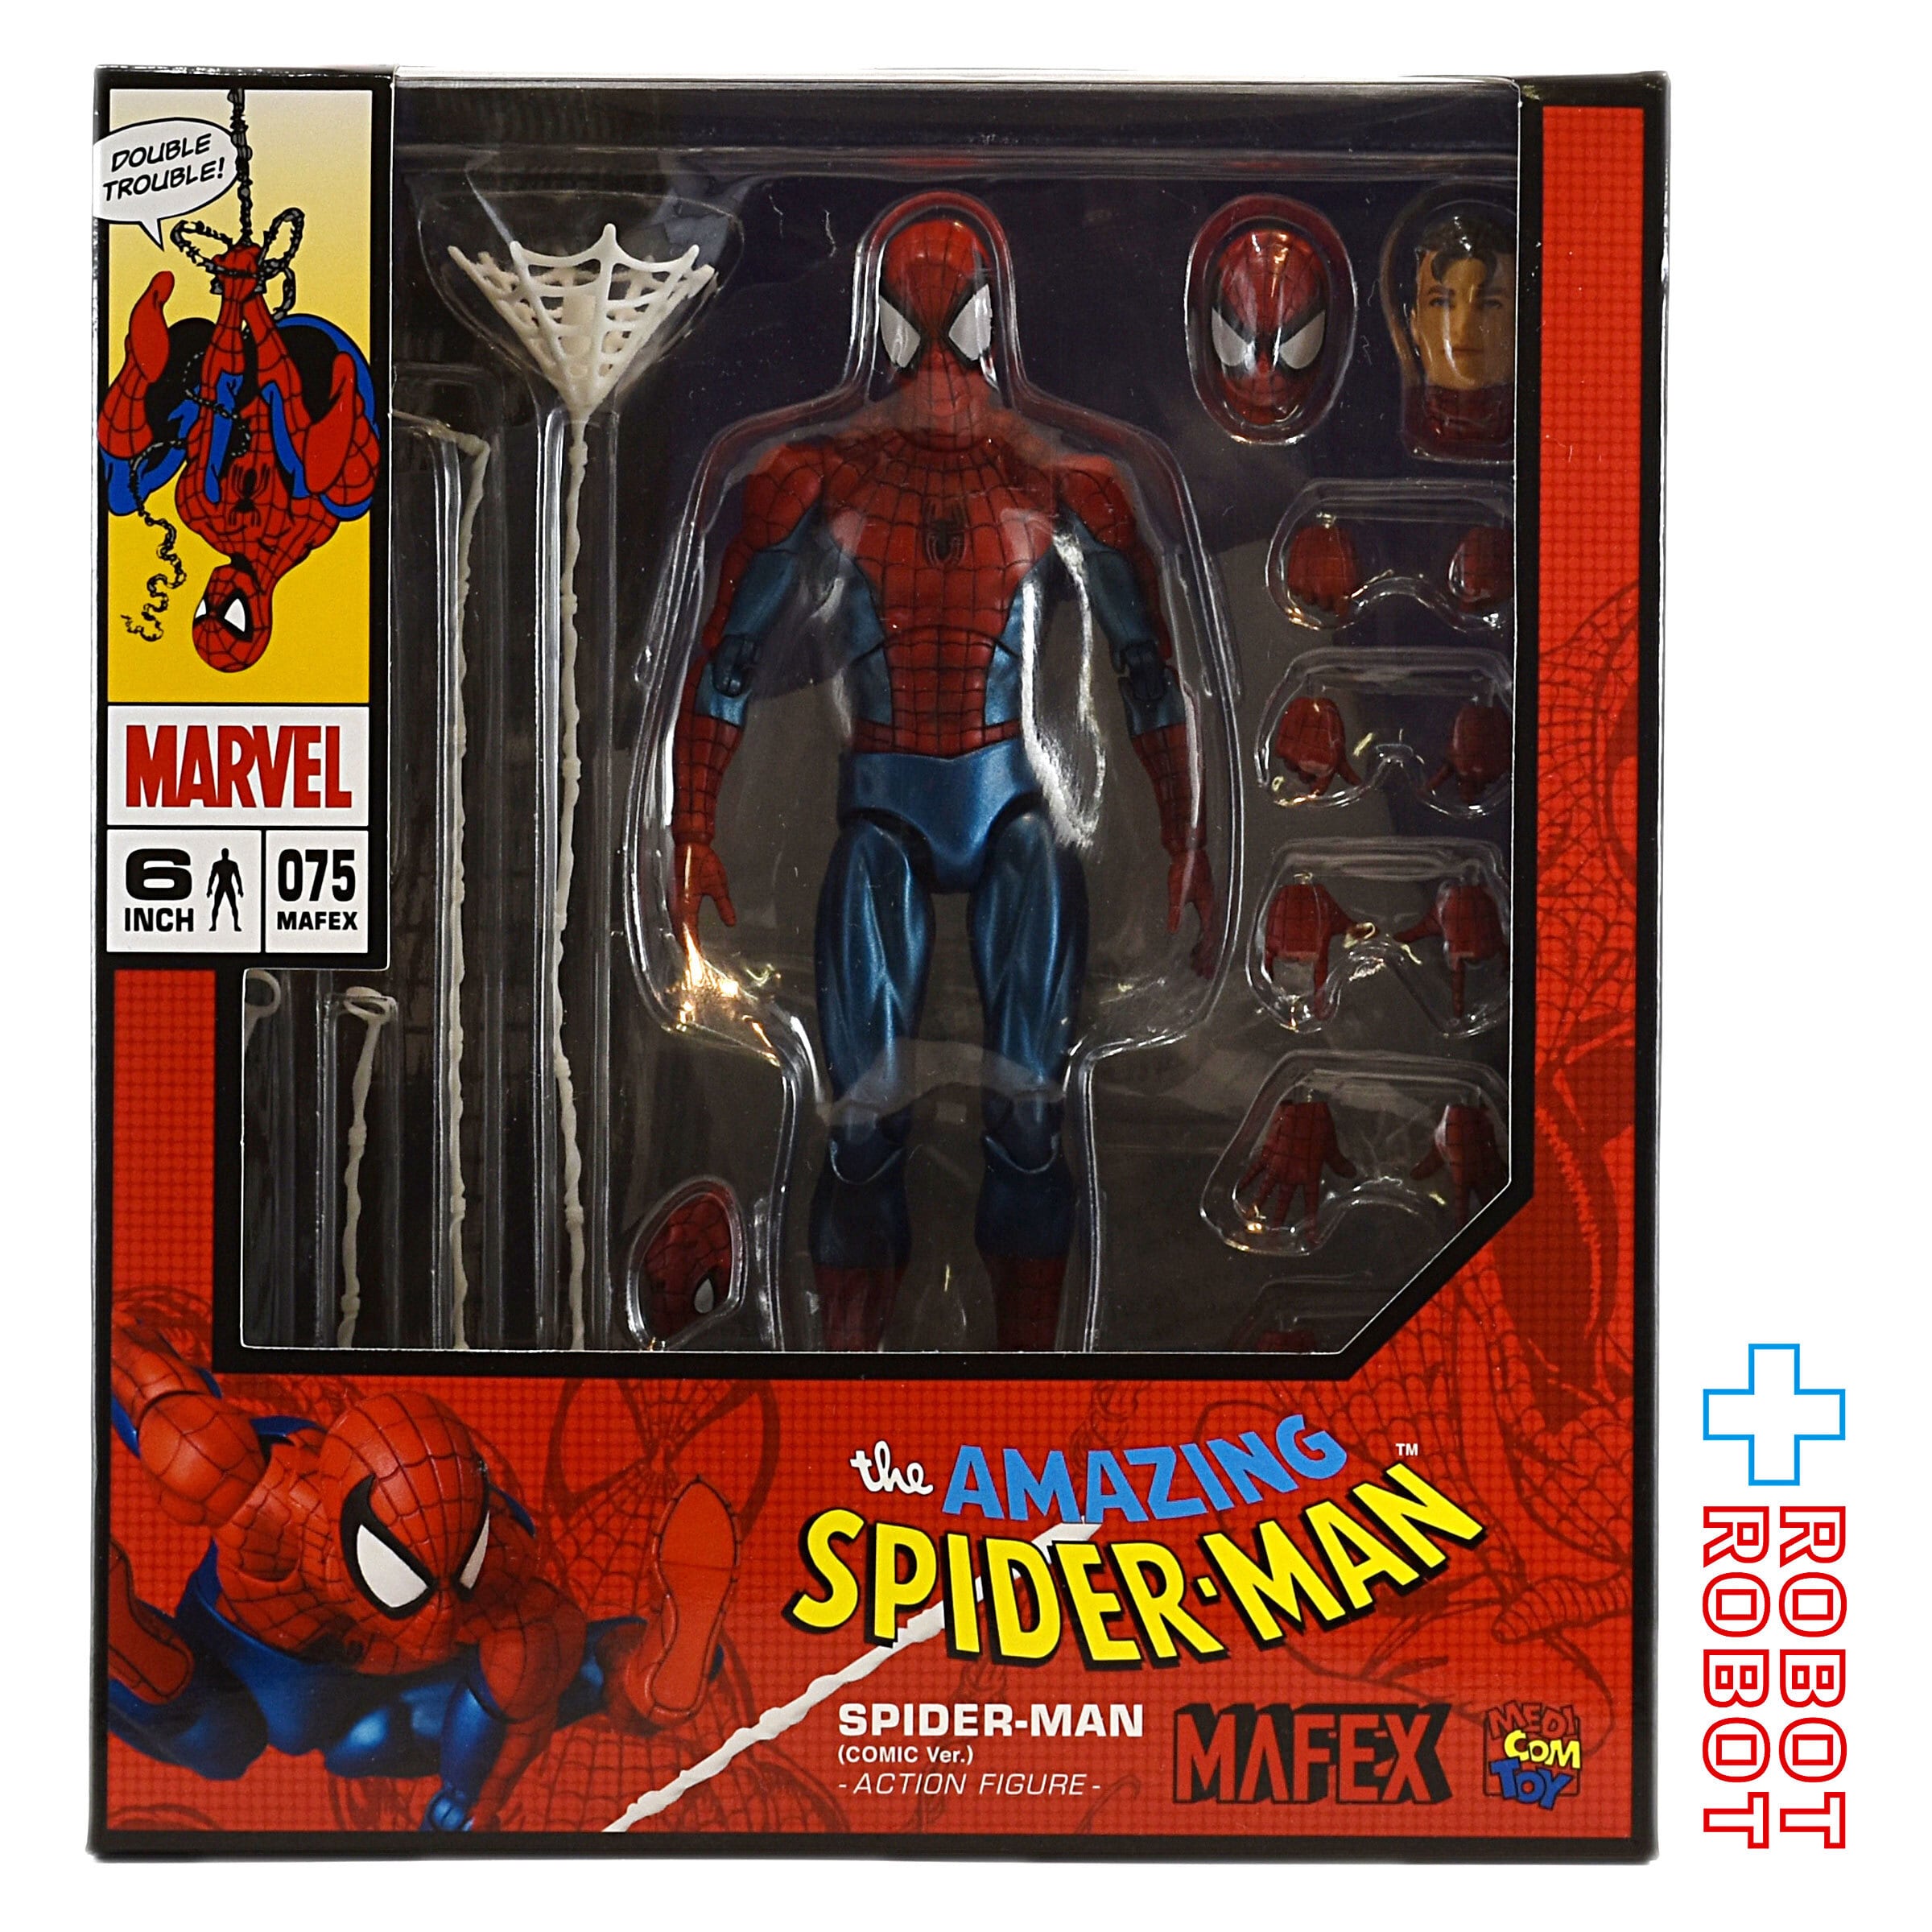 MAFEX スパイダーマン(コミック)再販版 - アメコミ